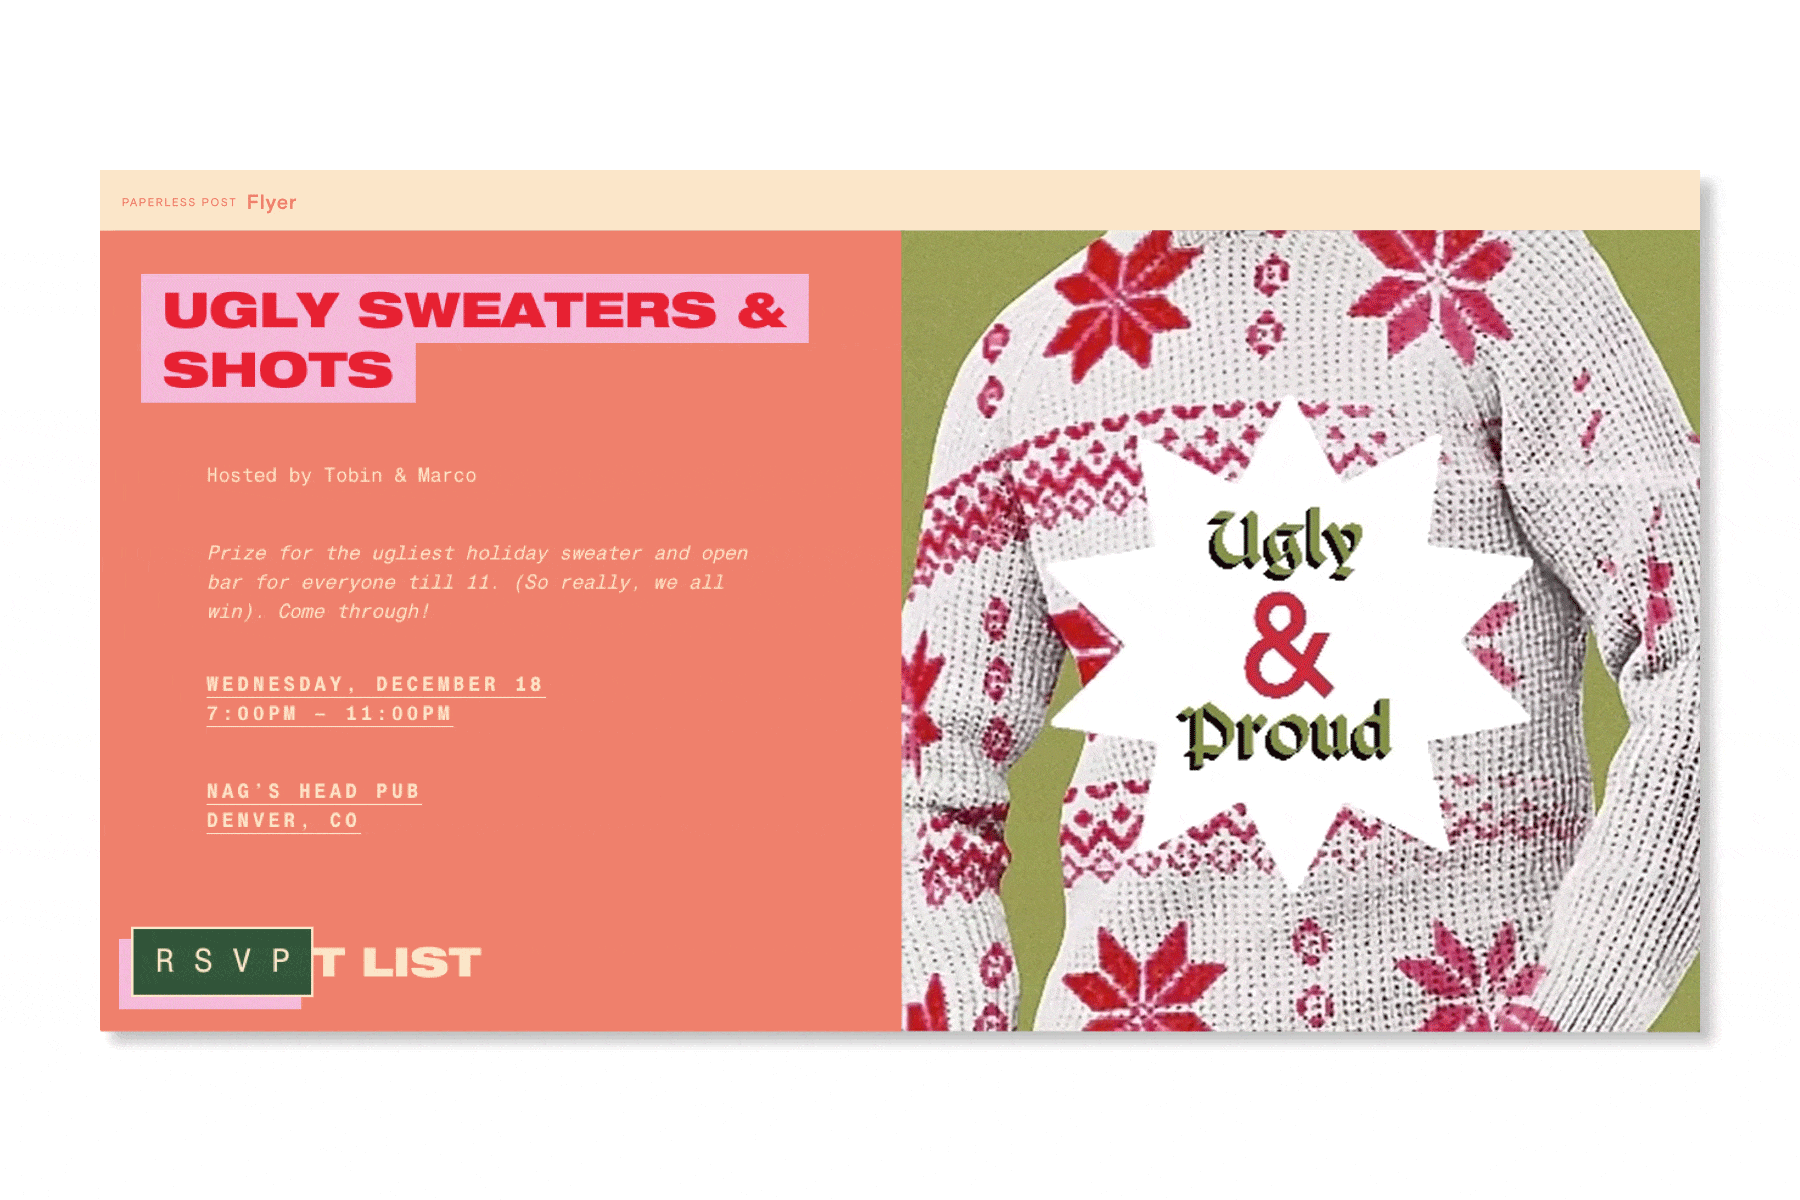 Ugly sweater Christmas party invitation featuring that says "ugly and proud" and features snowflakes and Christmas trees